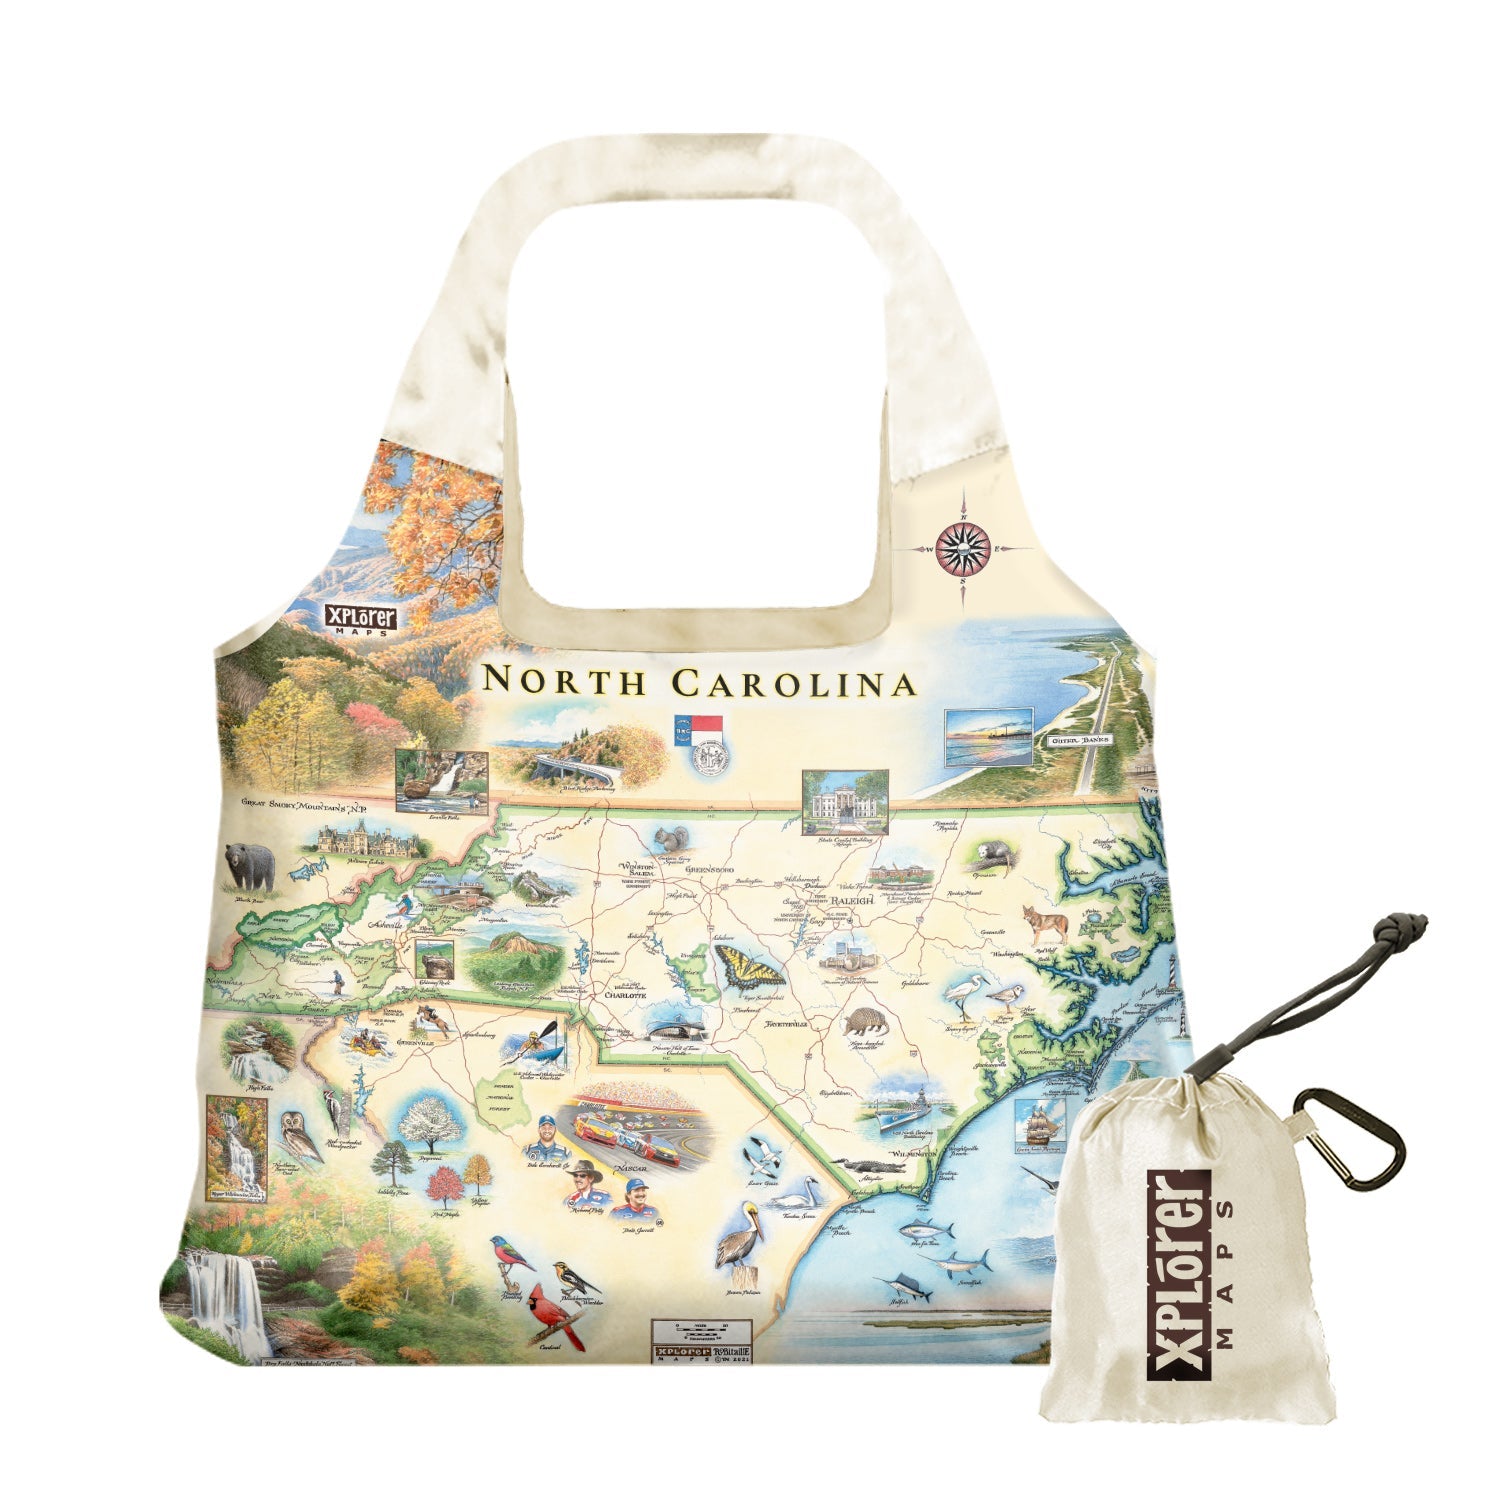 North Carolina State Map Pouch Tote Bags by Xplorer Maps. The map features Dry Falls in the Nantahala National Forest, the Outer Banks, a Nascar Hall of Fame, and the USS North Carolina on the coast.